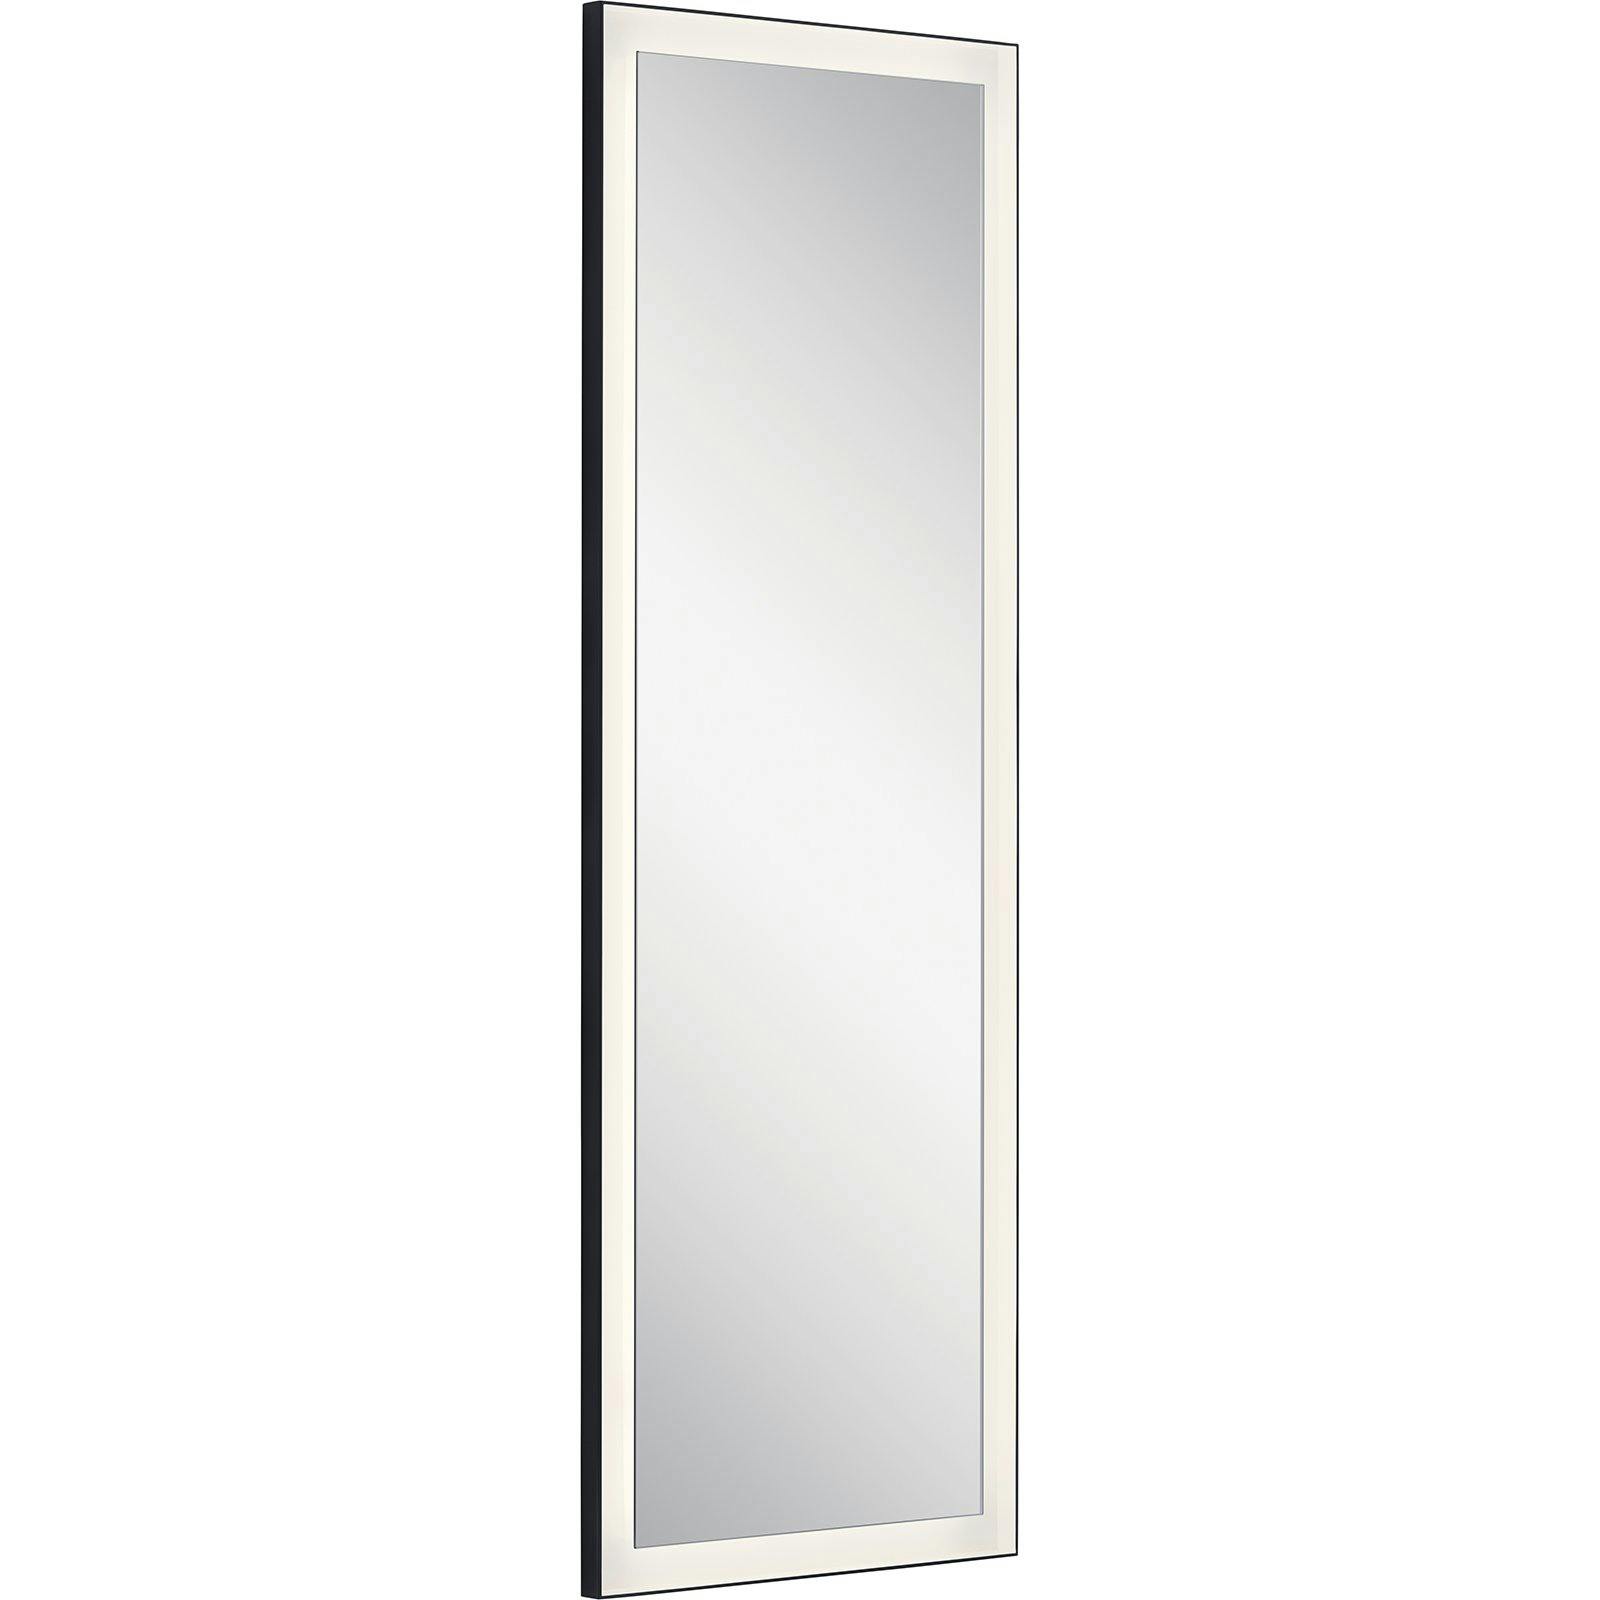 Ryame™ 20" Lighted Mirror Black on a white background